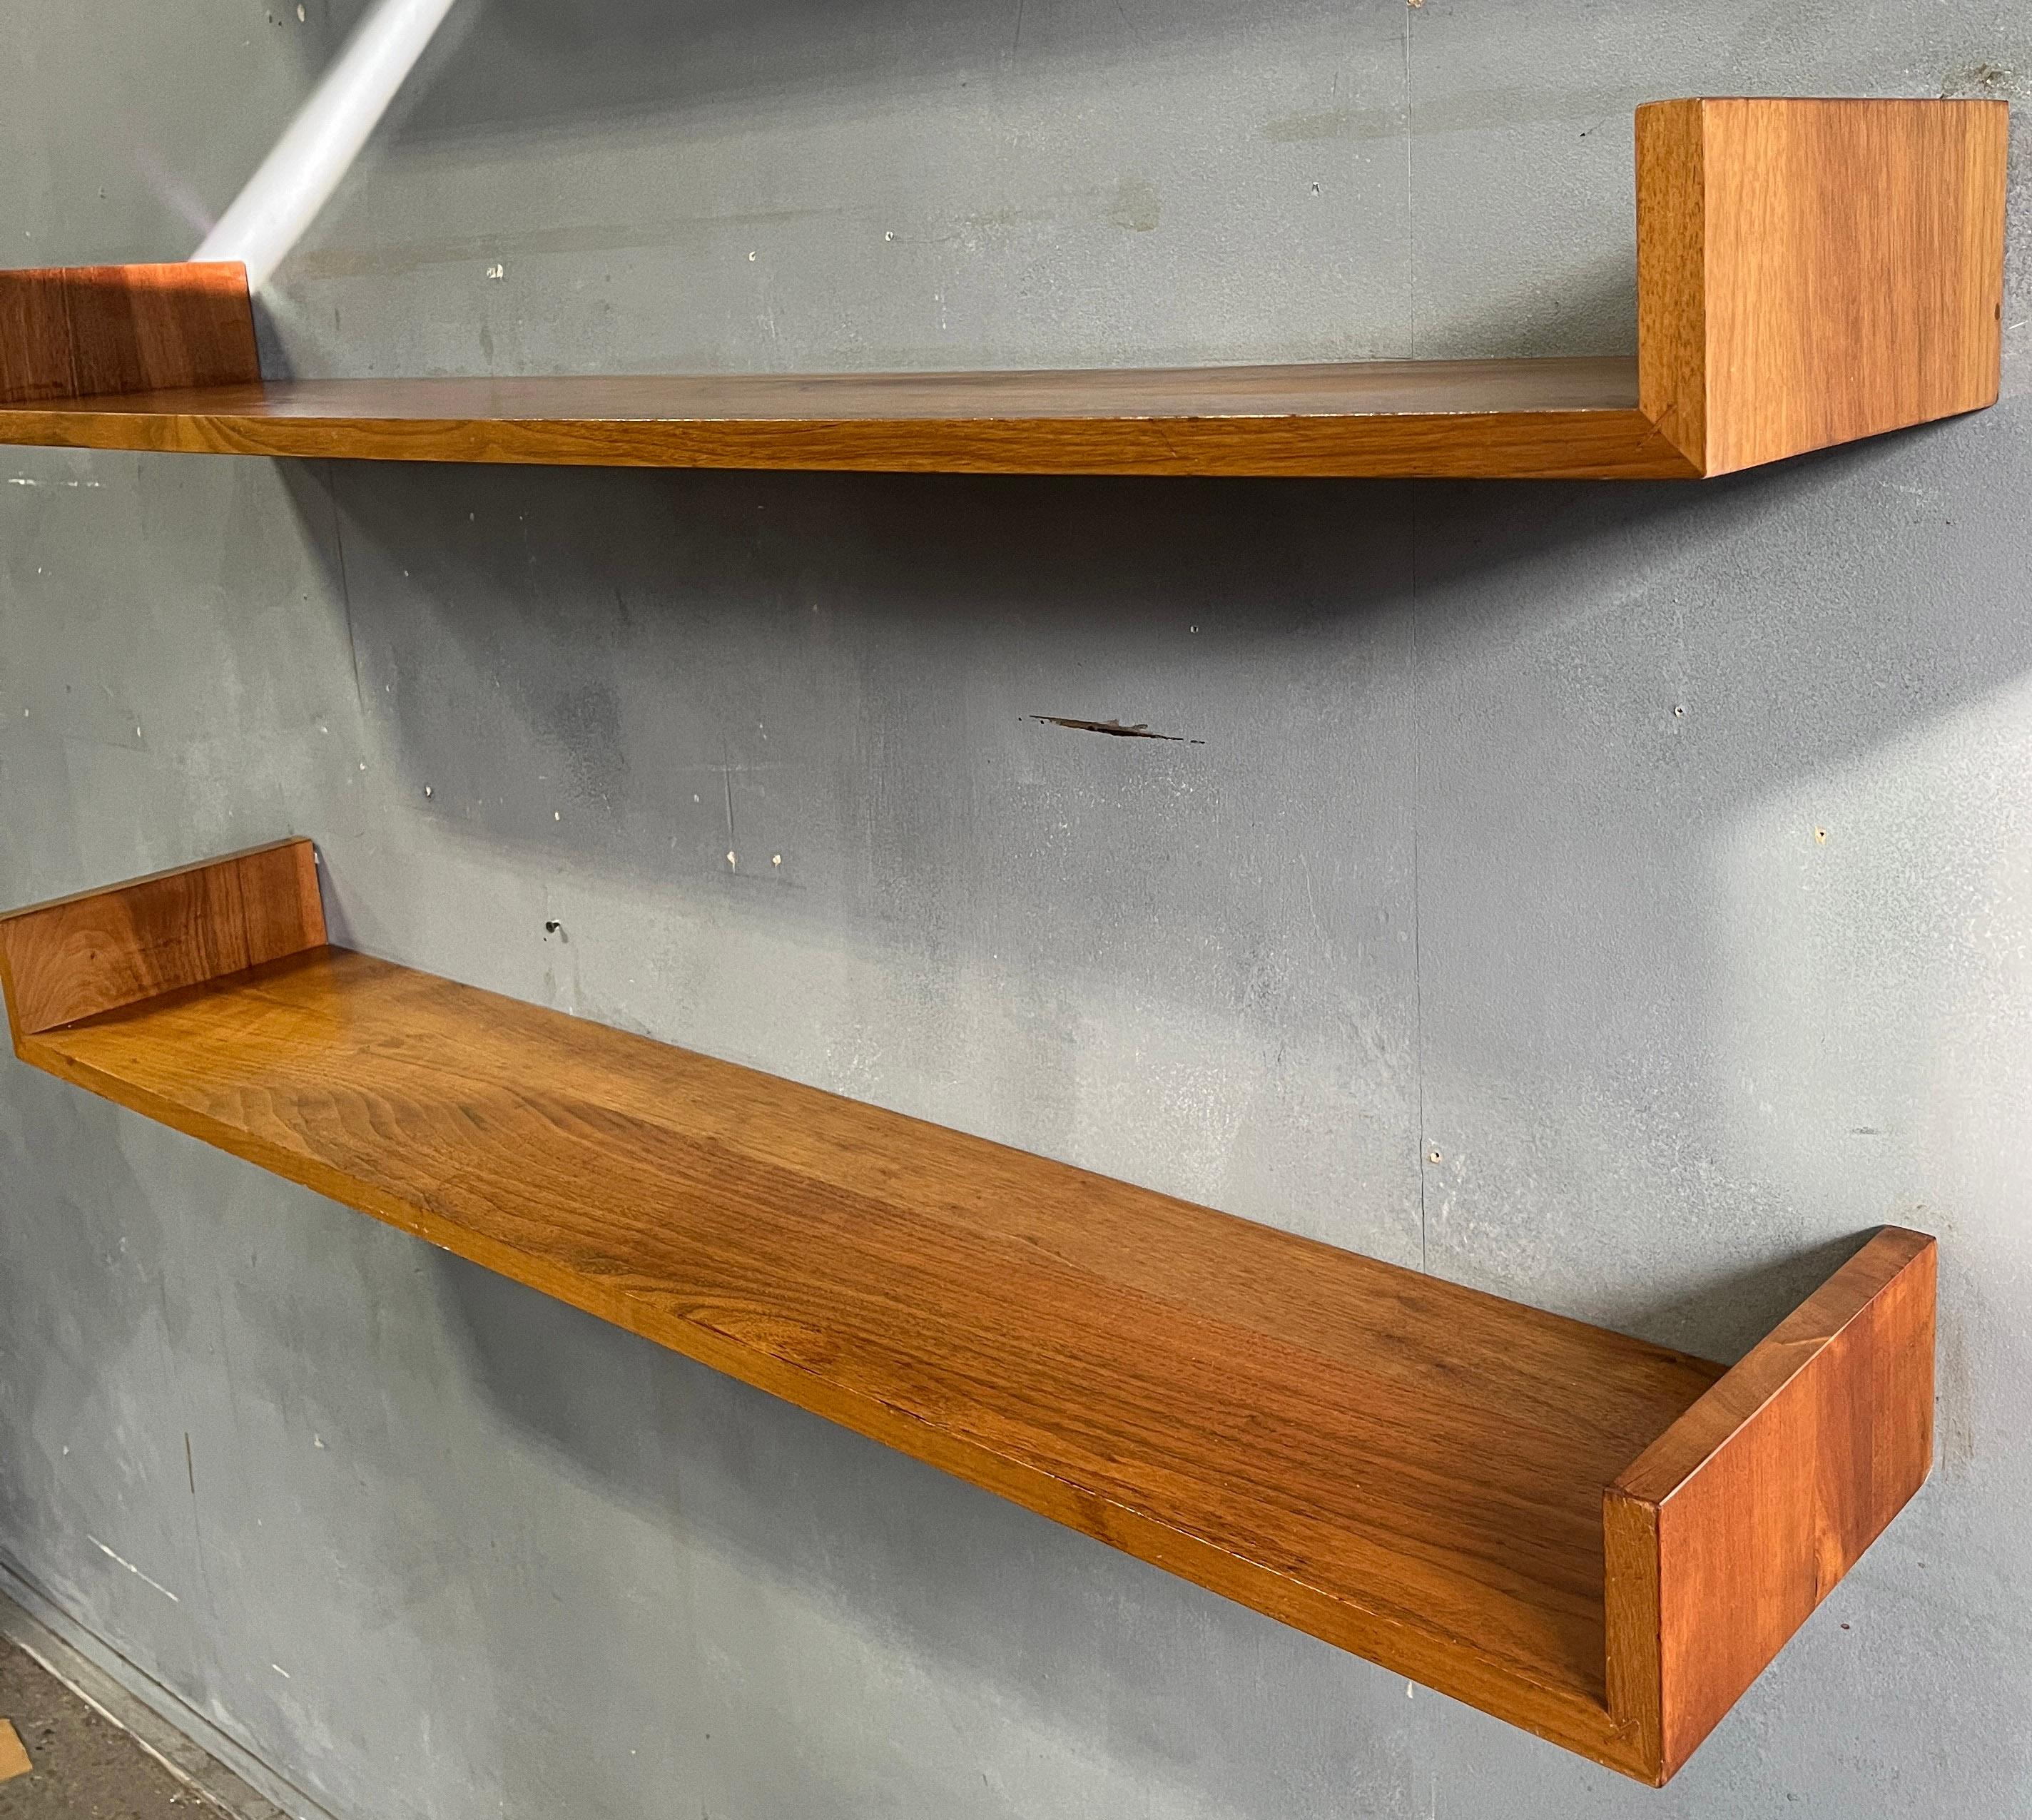 For your consideration is this rare and beautiful walnut floating wall shelf designed by Mel Smilow. They connect to the wall with simple key hole hangers. The symmetry of the design help support the shelf against the wall firmly and strong. No need